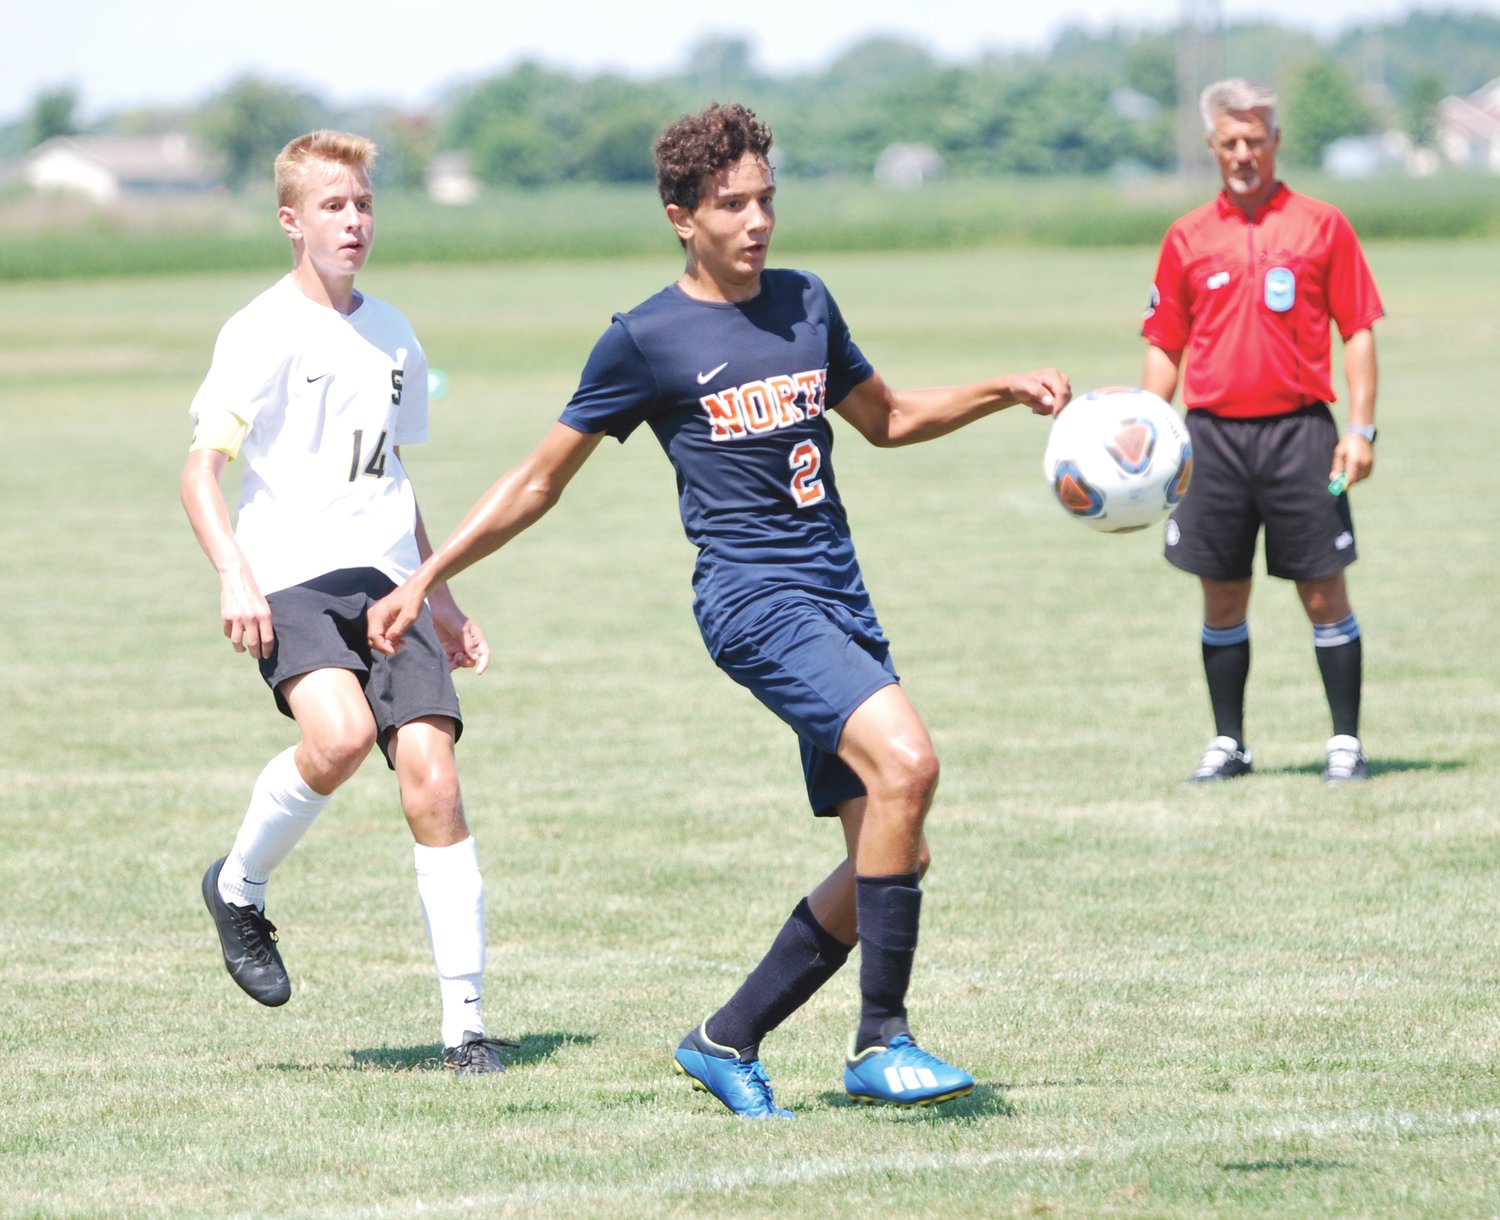 North Montgomery's James McClerkin receives a pass in a match against South Vermillion on Saturday.